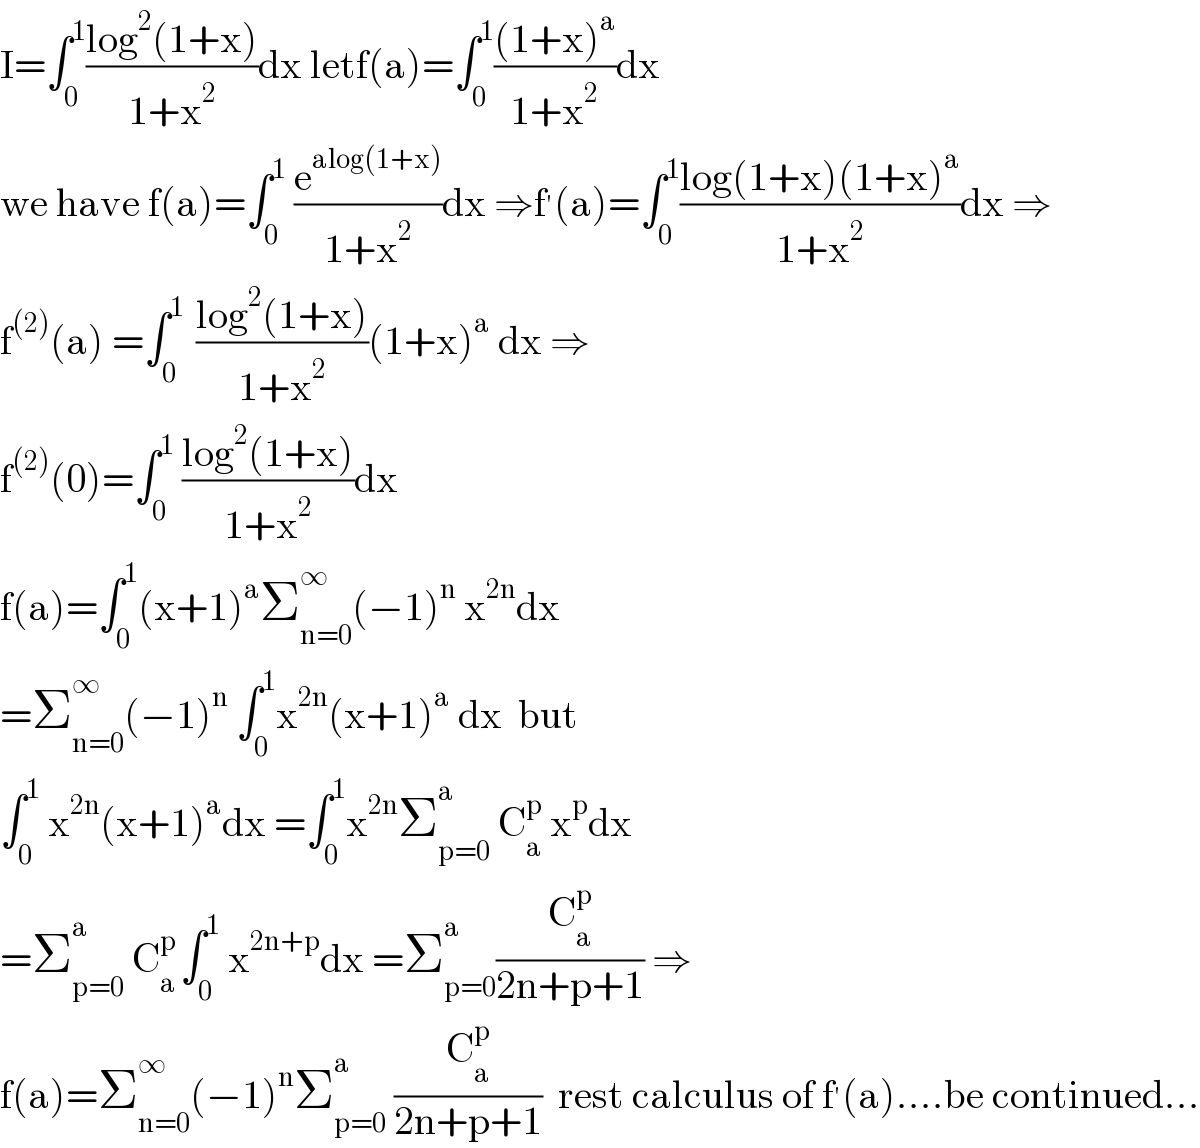 I=∫_0 ^1 ((log^2 (1+x))/(1+x^2 ))dx letf(a)=∫_0 ^1 (((1+x)^a )/(1+x^2 ))dx        we have f(a)=∫_0 ^1  (e^(alog(1+x)) /(1+x^2 ))dx ⇒f^′ (a)=∫_0 ^1 ((log(1+x)(1+x)^a )/(1+x^2 ))dx ⇒  f^((2)) (a) =∫_0 ^(1 )  ((log^2 (1+x))/(1+x^2 ))(1+x)^a  dx ⇒  f^((2)) (0)=∫_0 ^1  ((log^2 (1+x))/(1+x^2 ))dx  f(a)=∫_0 ^1 (x+1)^a Σ_(n=0) ^∞ (−1)^n  x^(2n) dx  =Σ_(n=0) ^∞ (−1)^n  ∫_0 ^1 x^(2n) (x+1)^a  dx  but  ∫_0 ^1  x^(2n) (x+1)^a dx =∫_0 ^1 x^(2n) Σ_(p=0) ^(a )  C_a ^p  x^p dx  =Σ_(p=0) ^a  C_a ^(p ) ∫_0 ^1  x^(2n+p) dx =Σ_(p=0) ^a (C_a ^p /(2n+p+1)) ⇒  f(a)=Σ_(n=0) ^∞ (−1)^n Σ_(p=0) ^a  (C_a ^p /(2n+p+1))  rest calculus of f^′ (a)....be continued...  